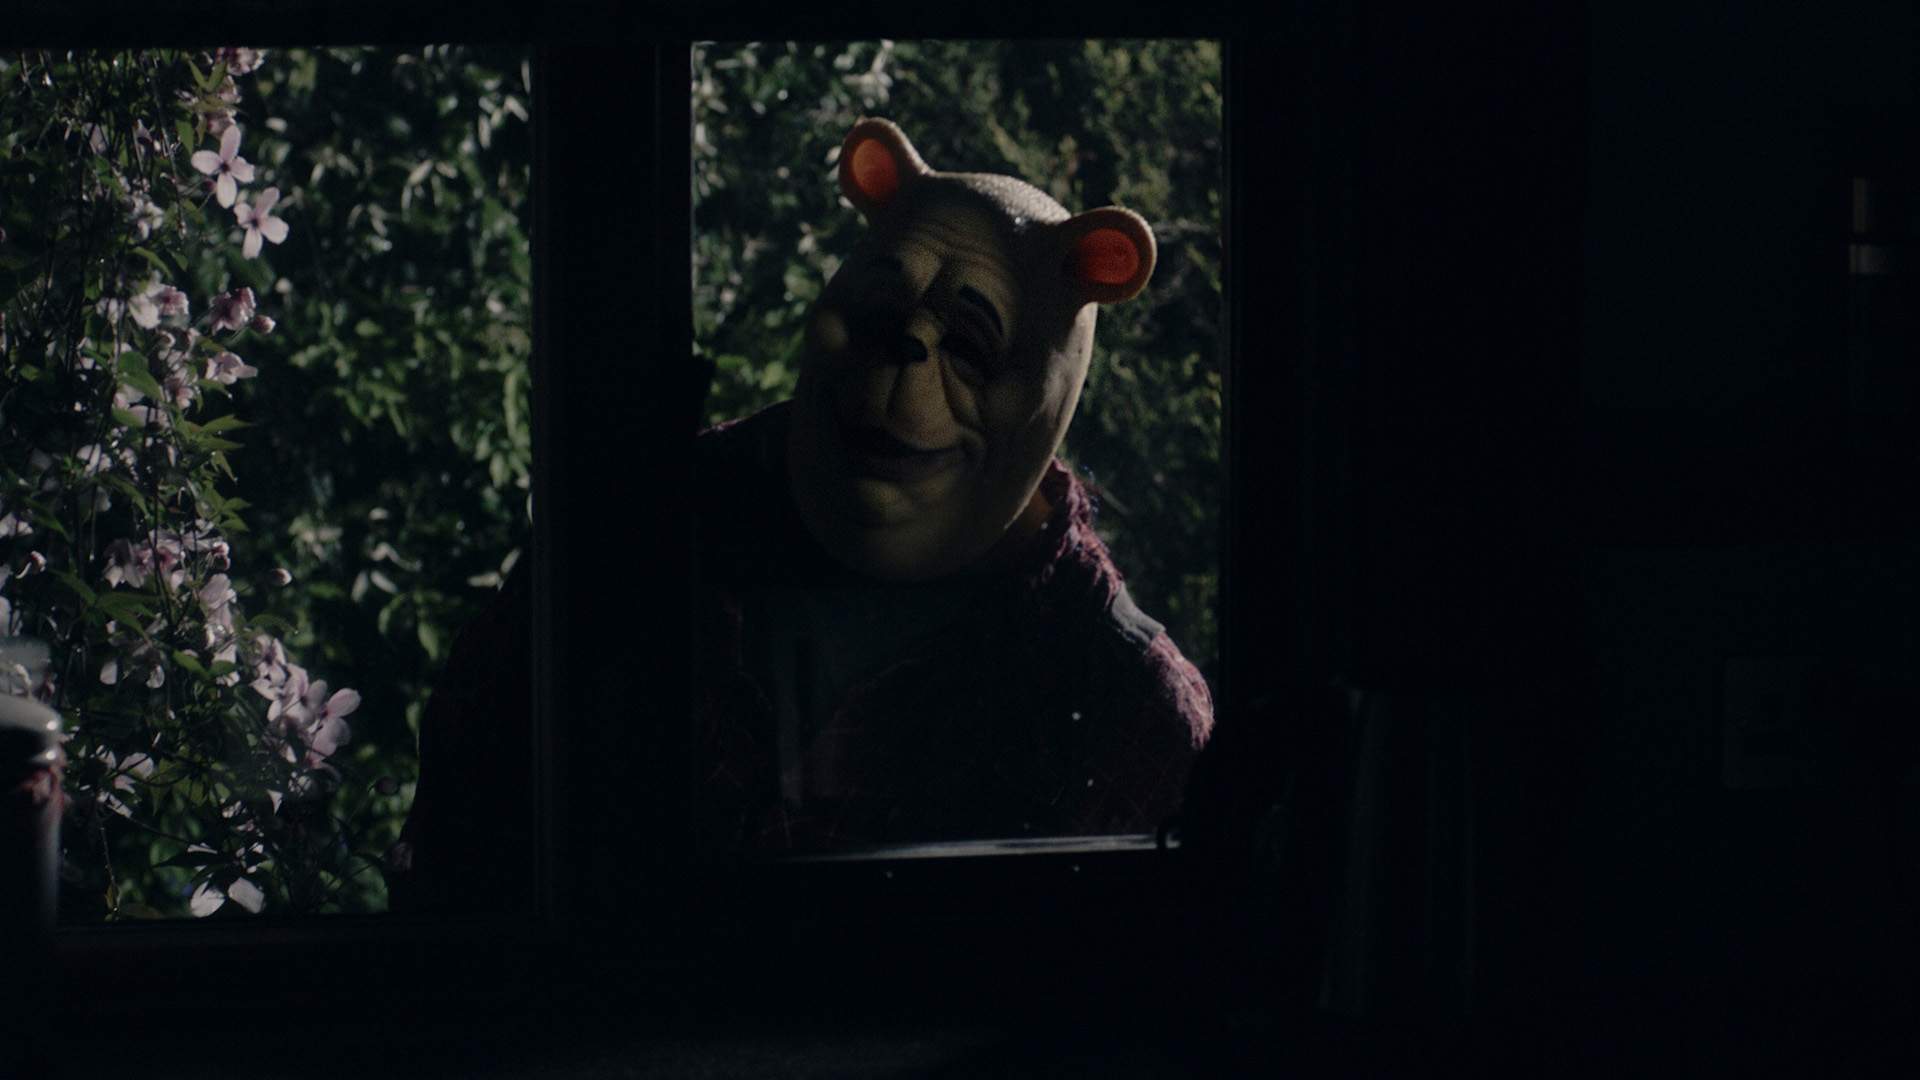 'Winnie-the-Pooh' Slasher Flick 'Blood and Honey' Just Dropped Its Supremely Creepy First Trailer